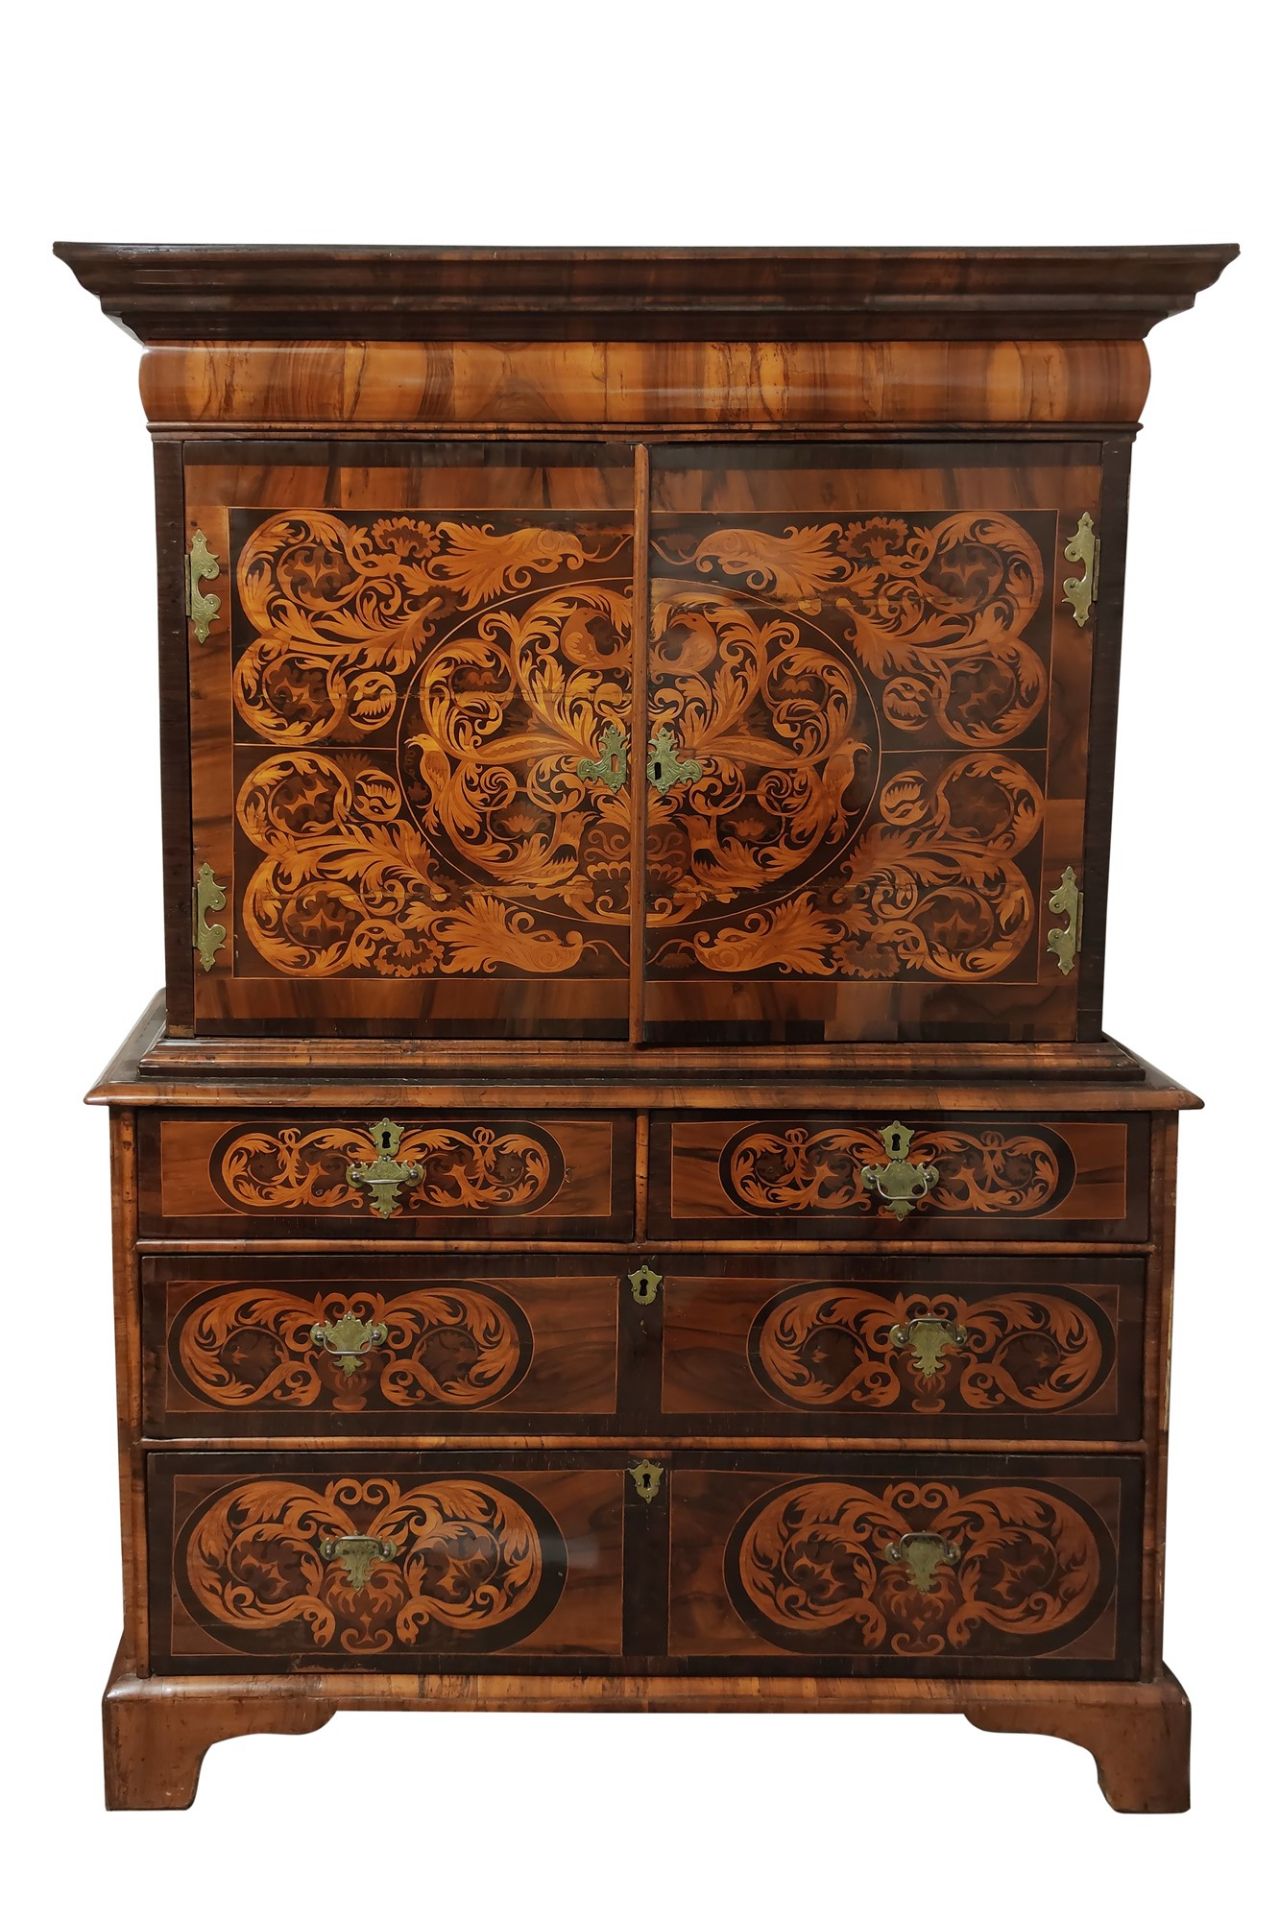 Inlaid two-parts secretaire, 18th-19th centuries